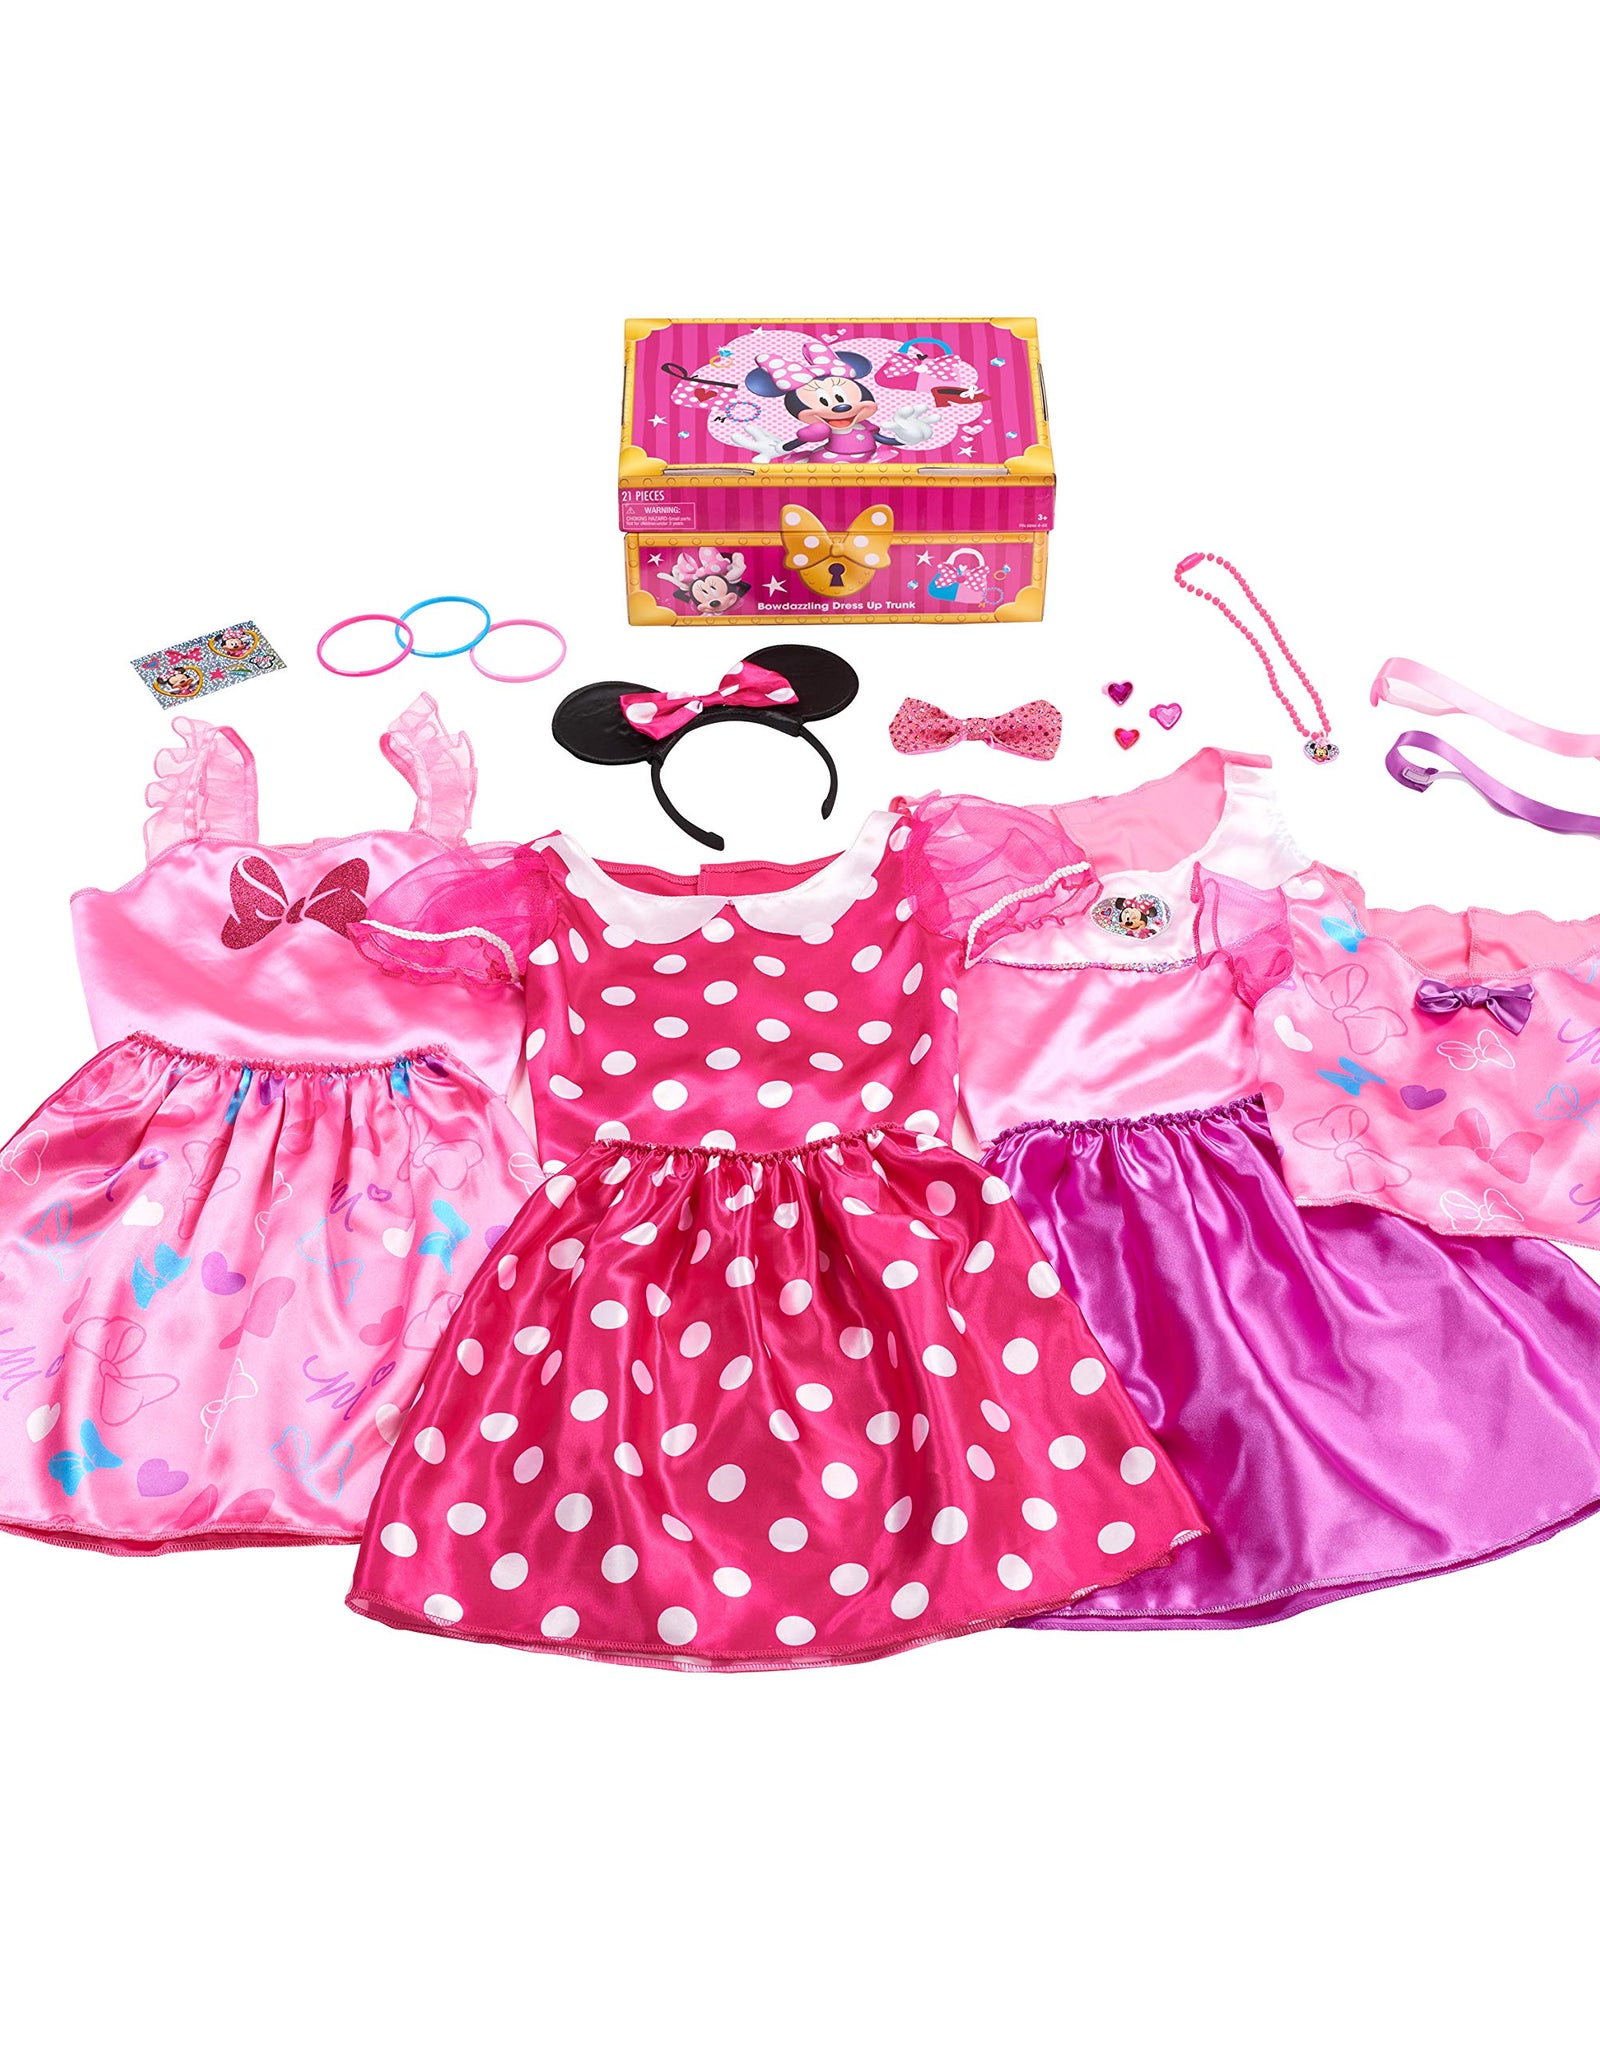 Disney Junior Minnie Mouse Bowdazzling Dress Up Trunk Set, 21 Pieces, Size 4-6x, Amazon Exclusive, by Just Play